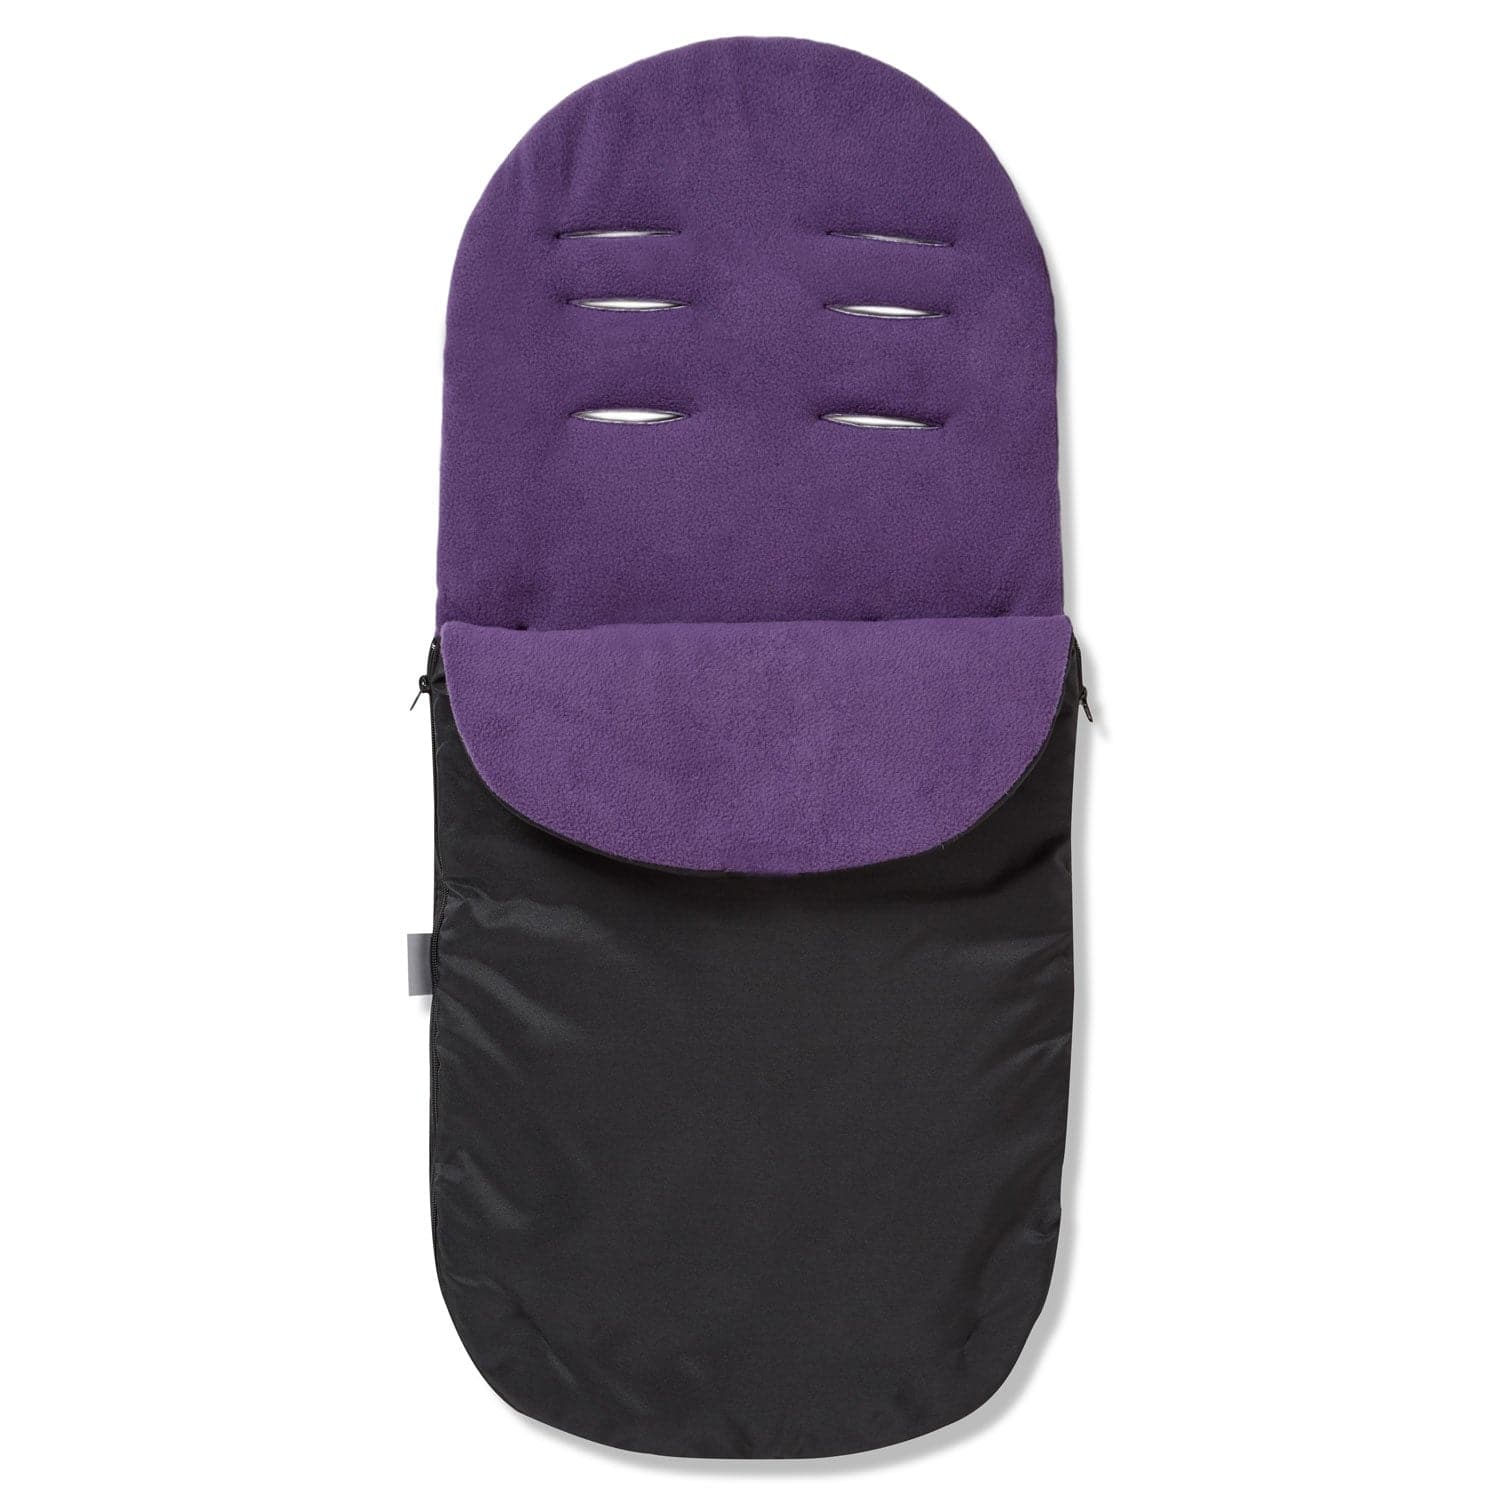 Footmuff / Cosy Toes Compatible with Stokke - Purple / Fits All Models | For Your Little One